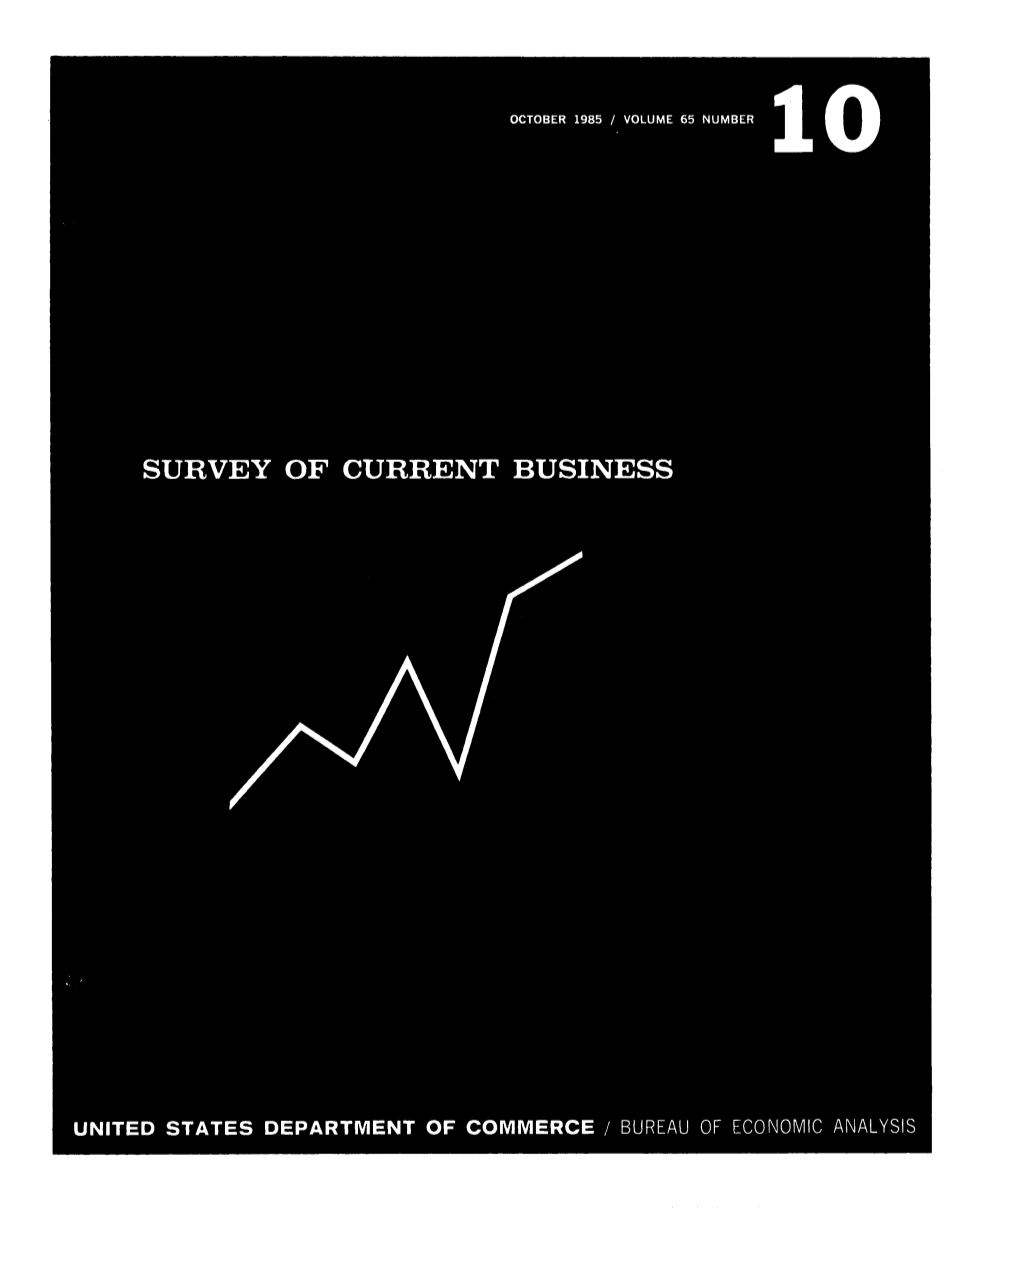 SURVEY of CURRENT BUSINESS October 1985